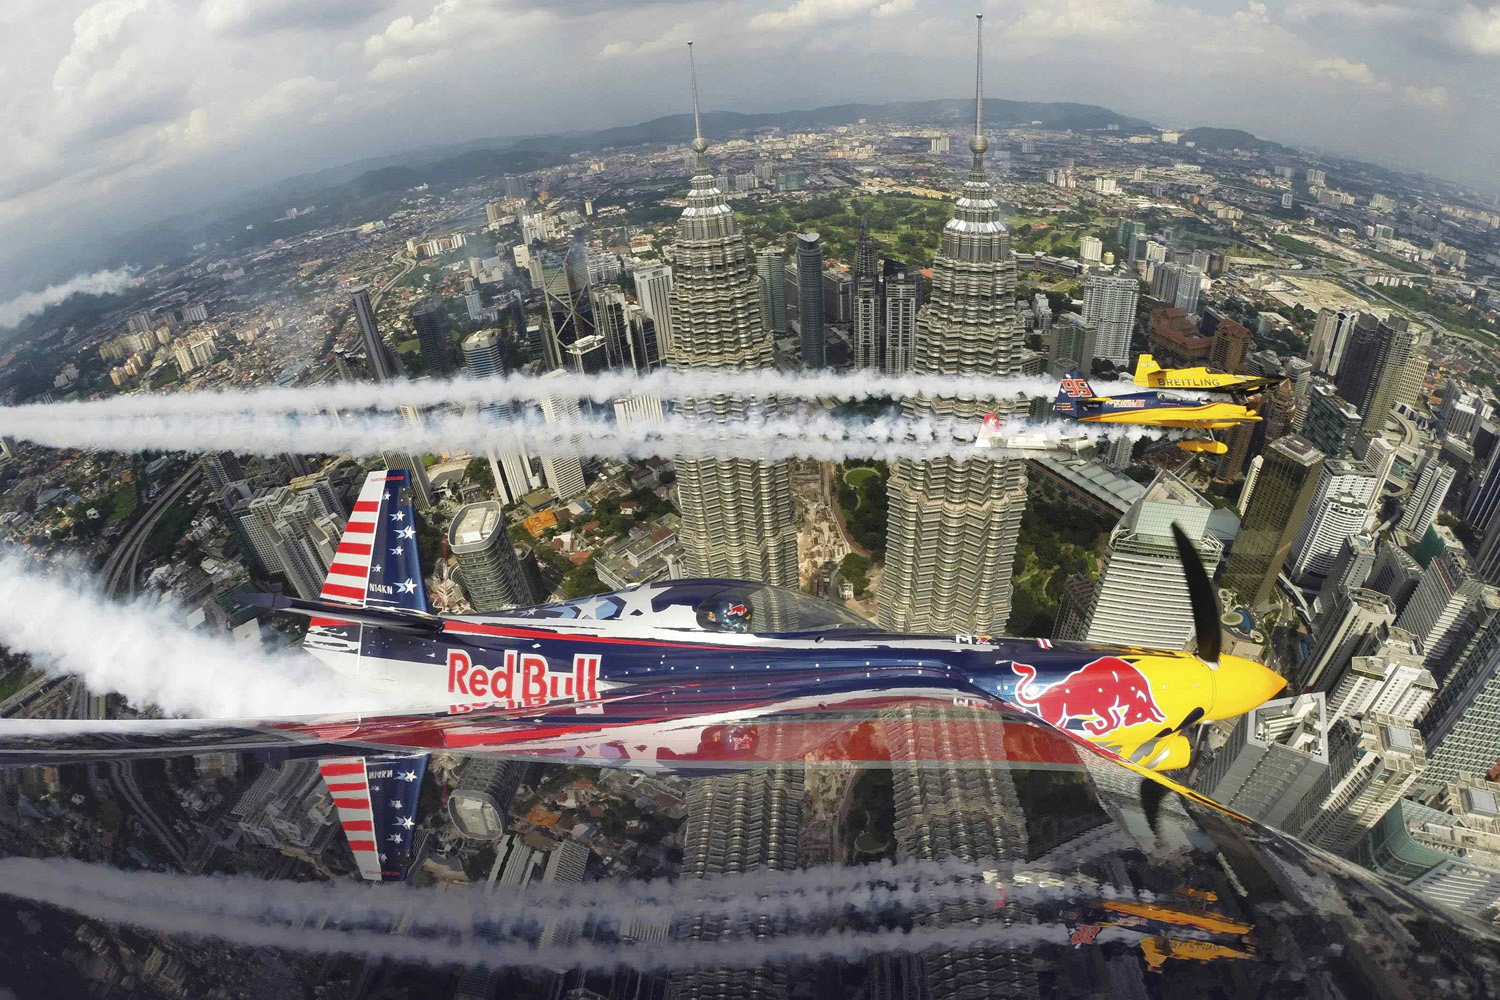 Kirby Chambliss of the U.S. flies in formation with Matt Hall of Australia, Yoshihide Muroya of Japan and Nigel Lamb of Britain prior to the third stage of the Red Bull Air Race World Championship in front of the Petronas Towers in Kuala Lumpur May 15, 2014.